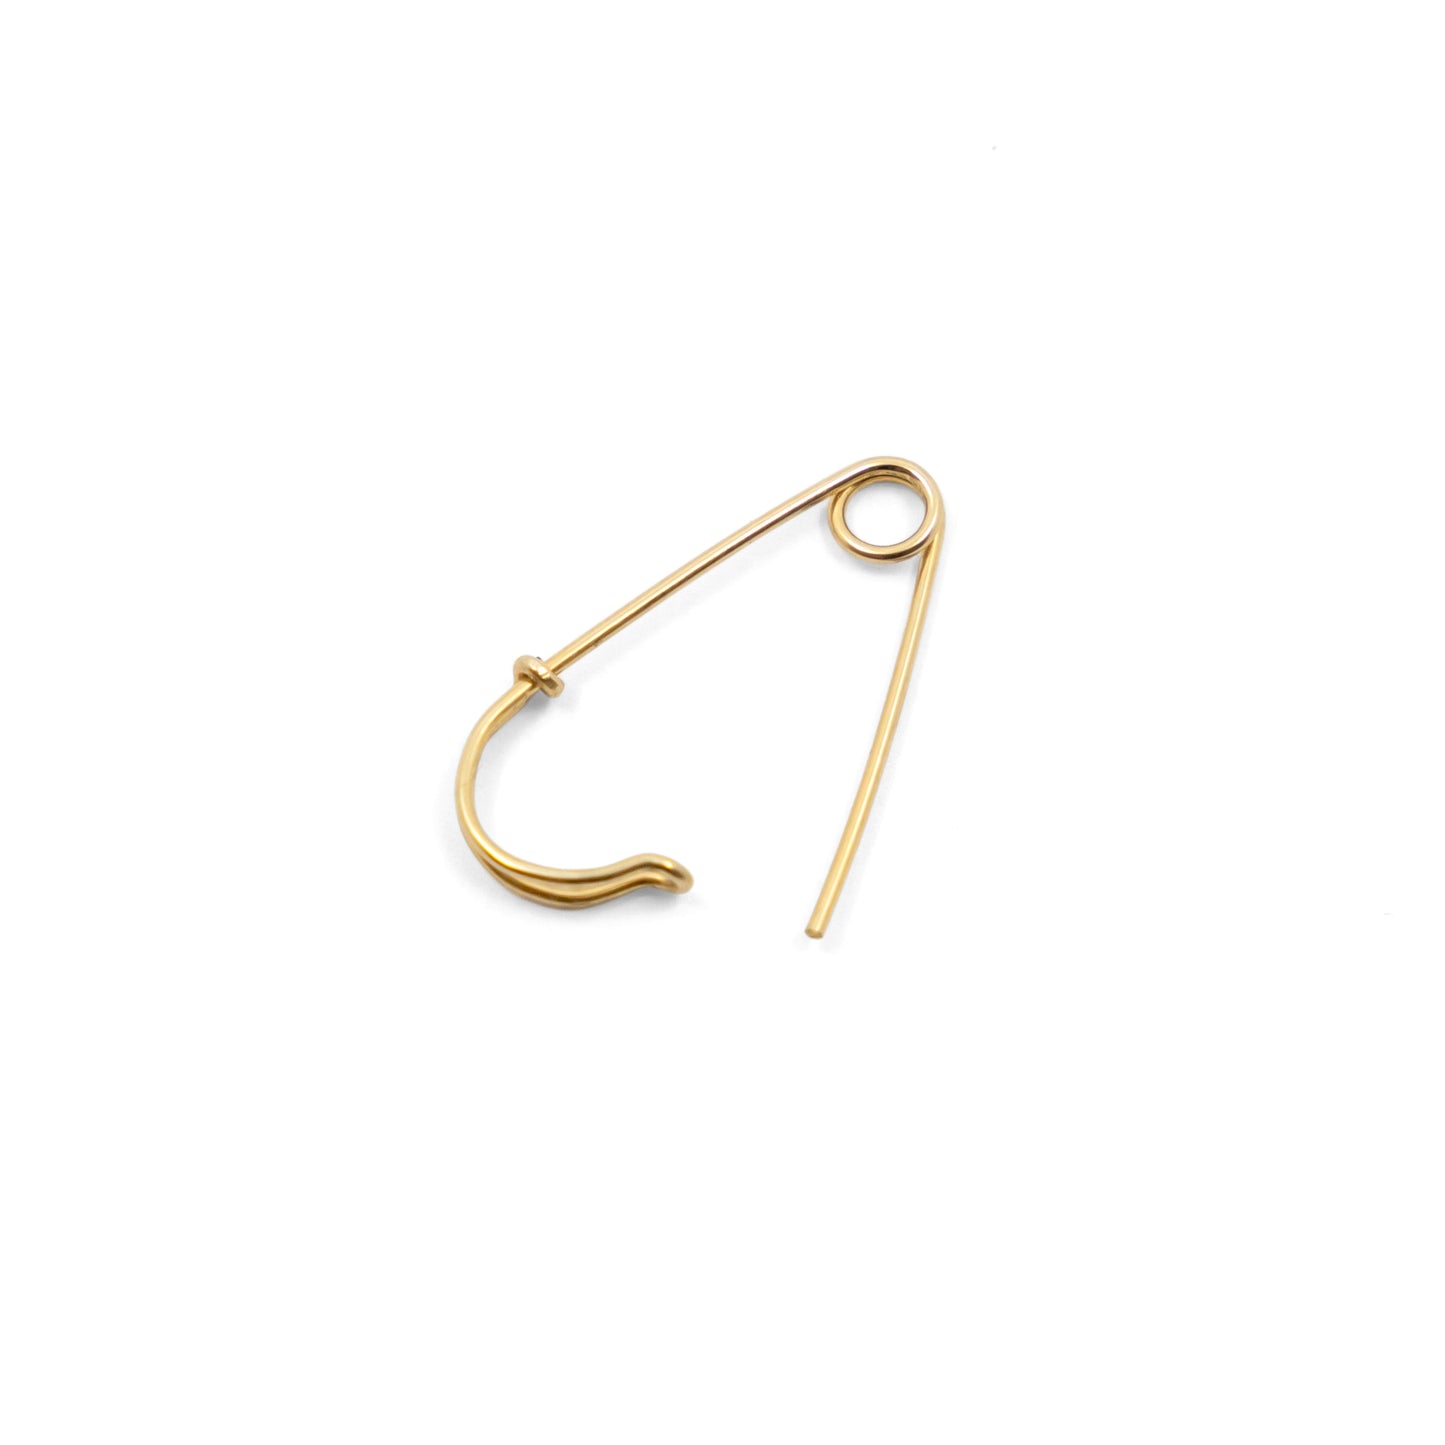 Wire Safety Pin Earring (Coiled) - 14k Yellow Gold - Futaba Hayashi